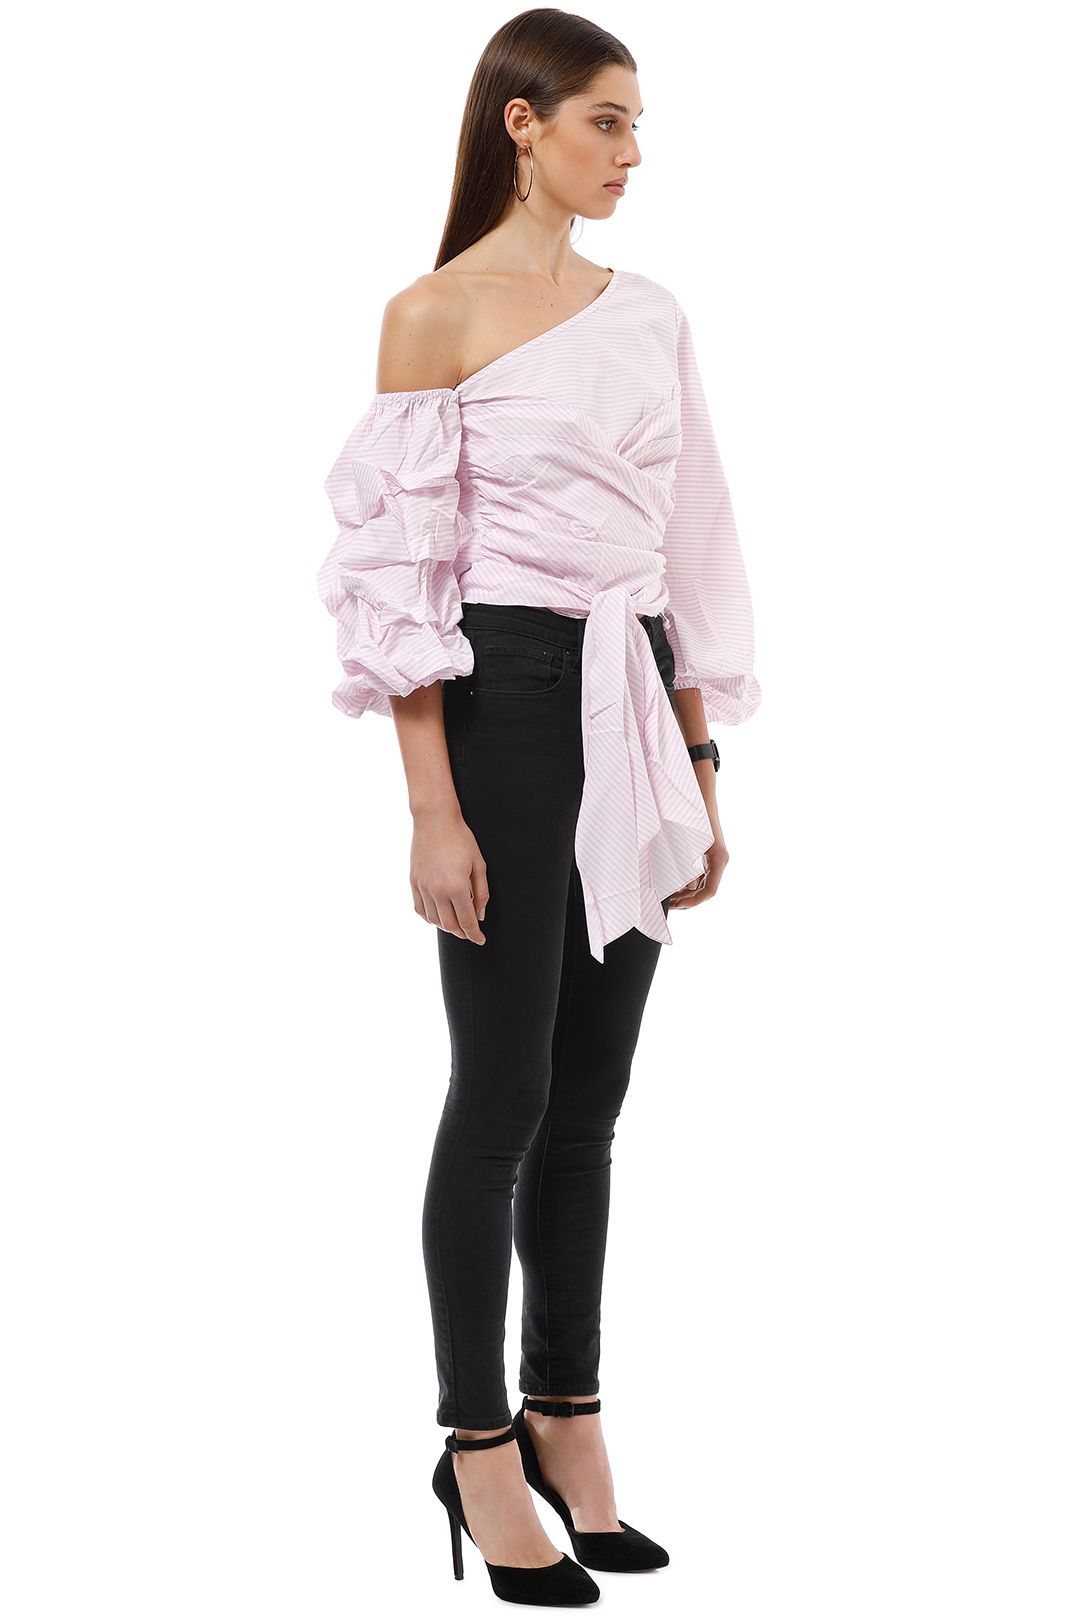 Maurie and Eve - Gabine Blouse - Pink - Side